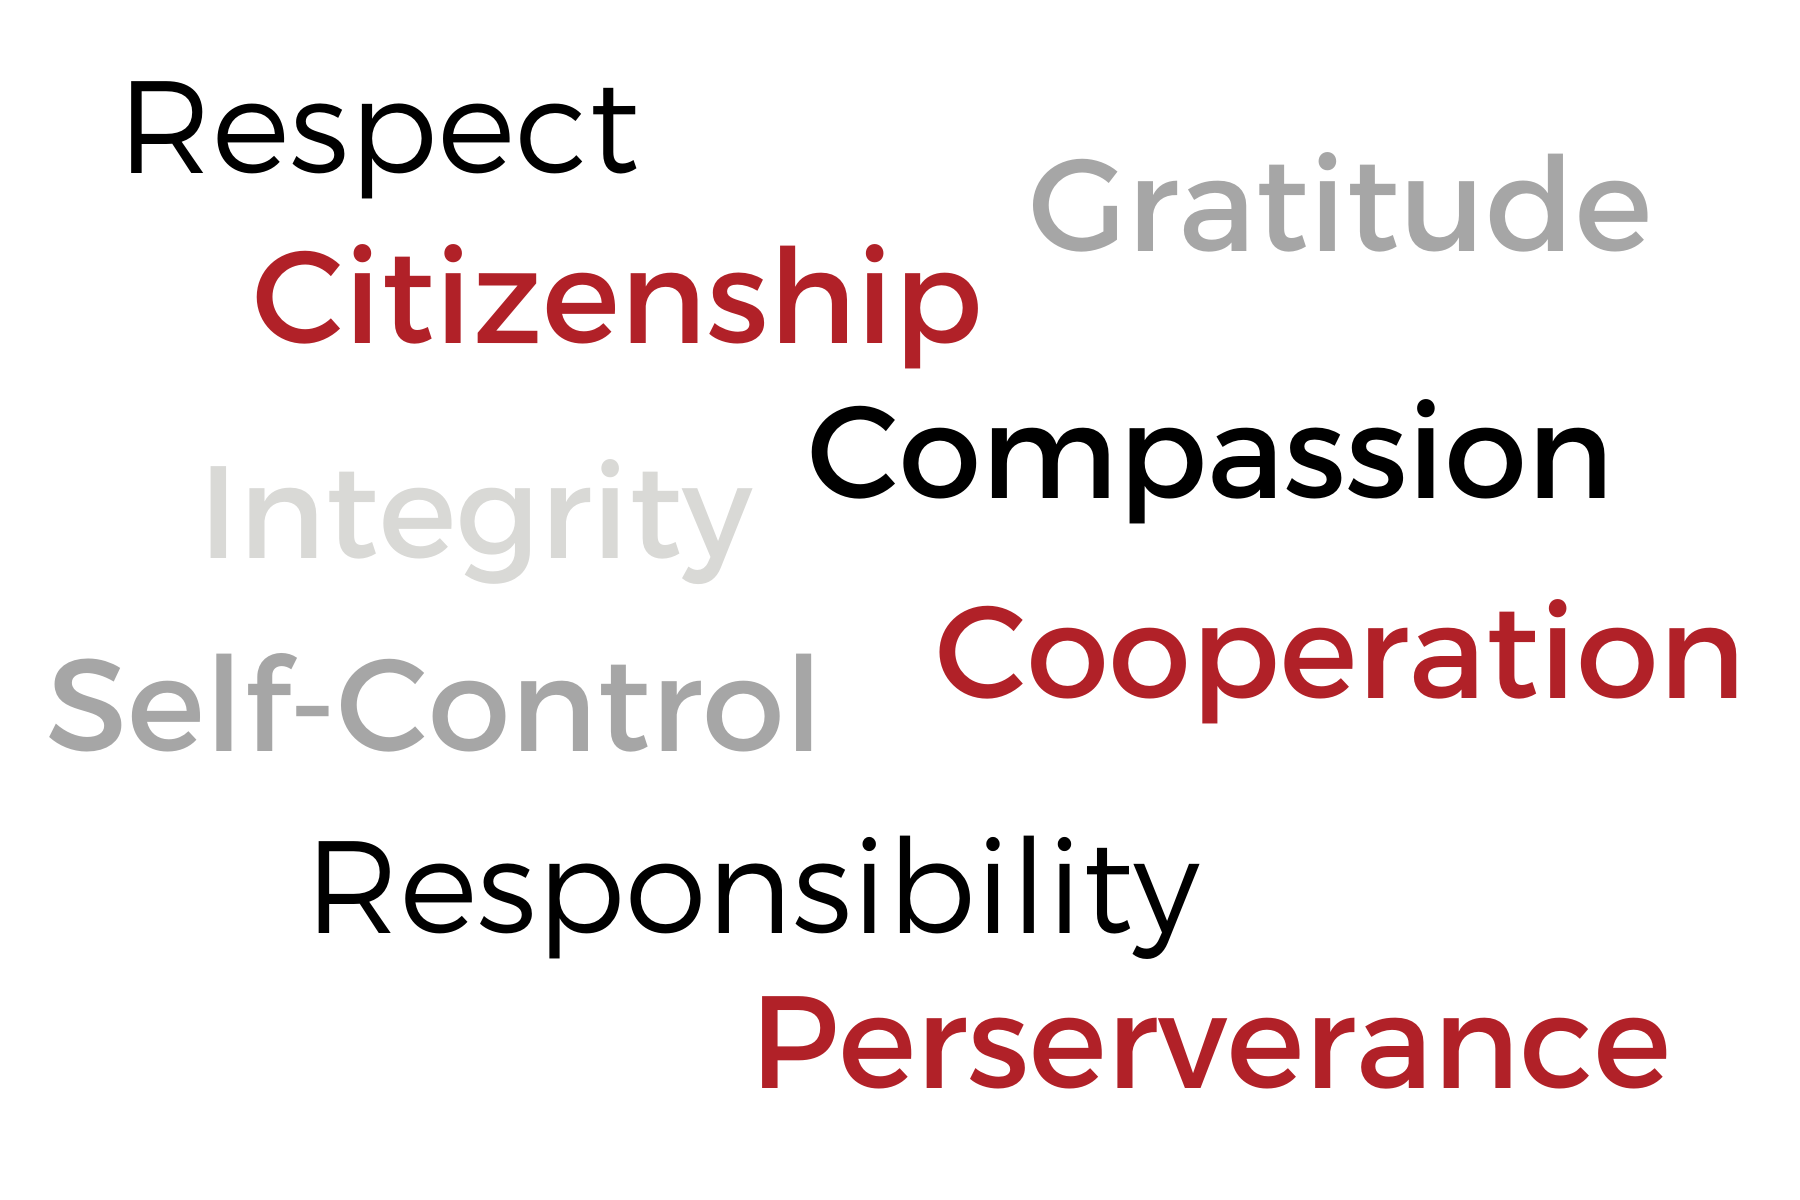 Image of character traits of respect, citizenship, gratitude, compassion, integrity, cooperation, self-control, responsibility, perserverance